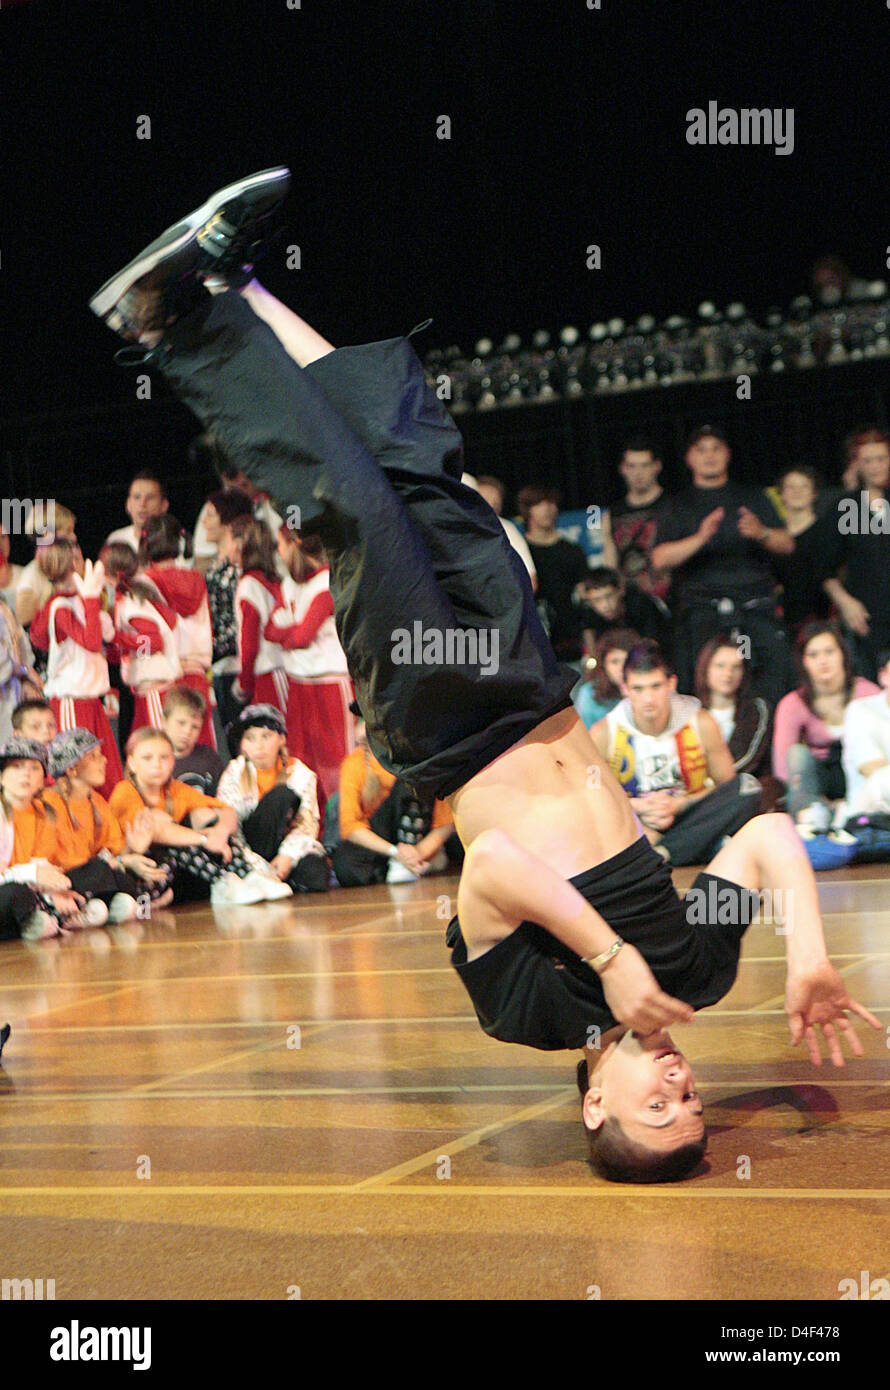 A breaker of German 'United B-Boys' performs his skills in the Breakdance Team Juniors competition at the 10th HipHop World Championshiops in Bremen, Germany, 11 June 2008. Some 3,500 participants from 33 countries compete for titles in the disciplines HipHop, Breakdance and Electric Boogie frmo 11 to 15 June. Photo: CARMEN JASPERSEN Stock Photo